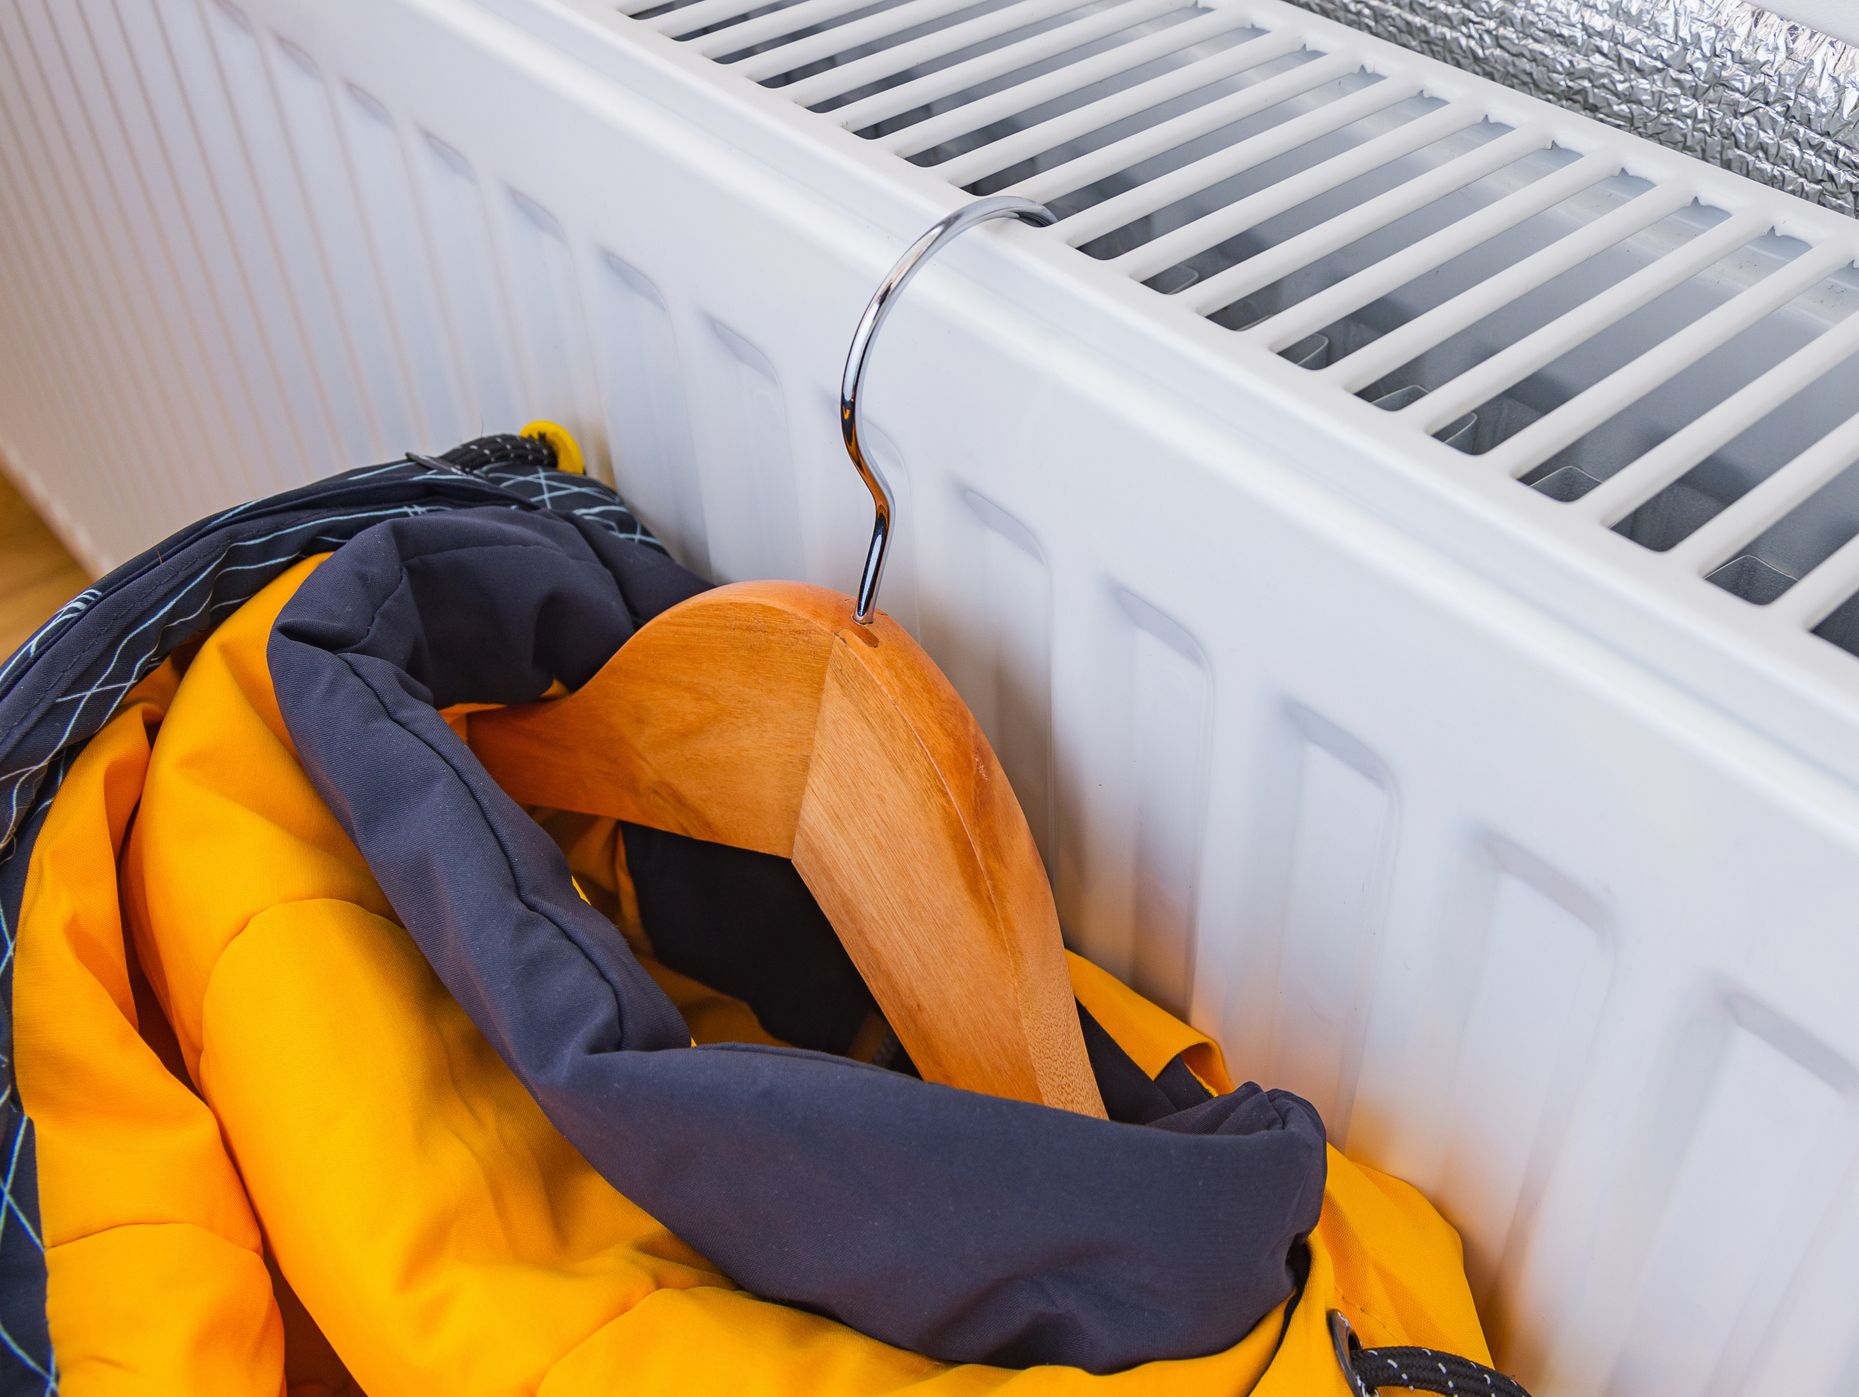 Jacket hanging on a gas heater